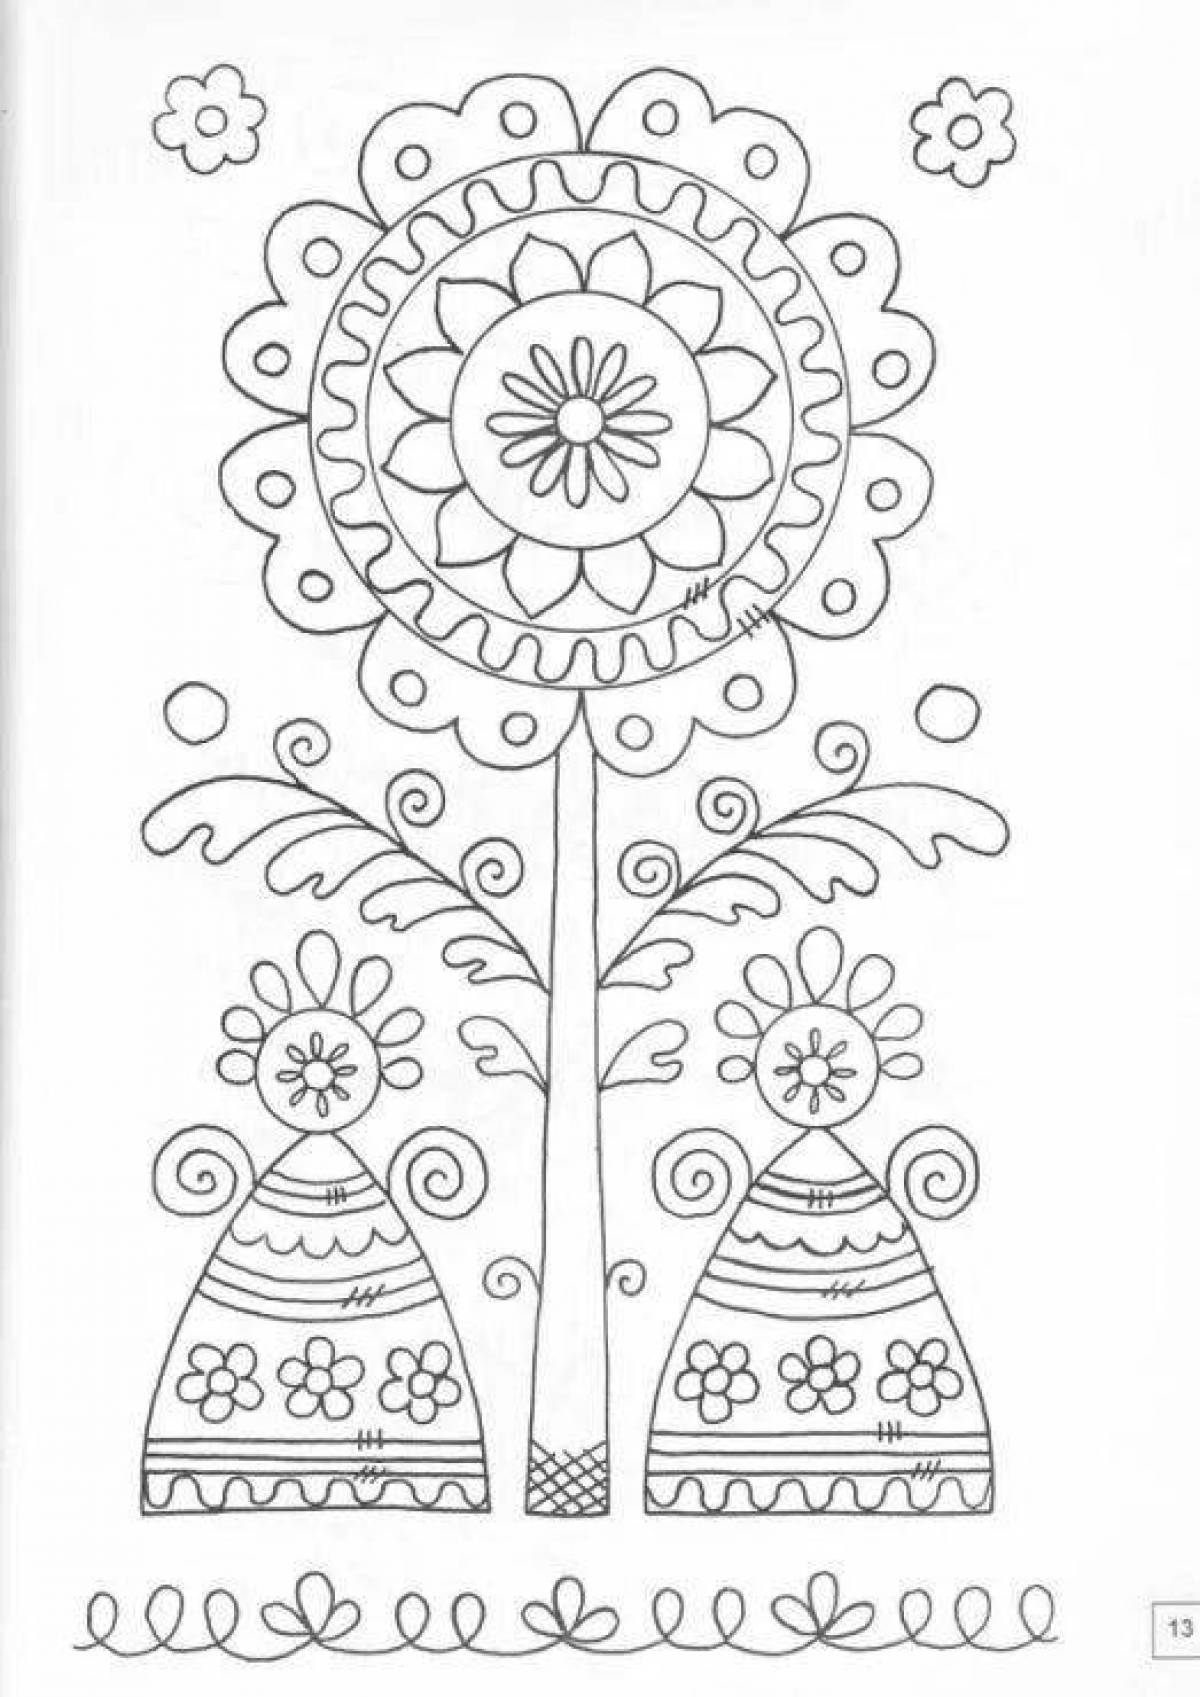 Bright towel coloring page